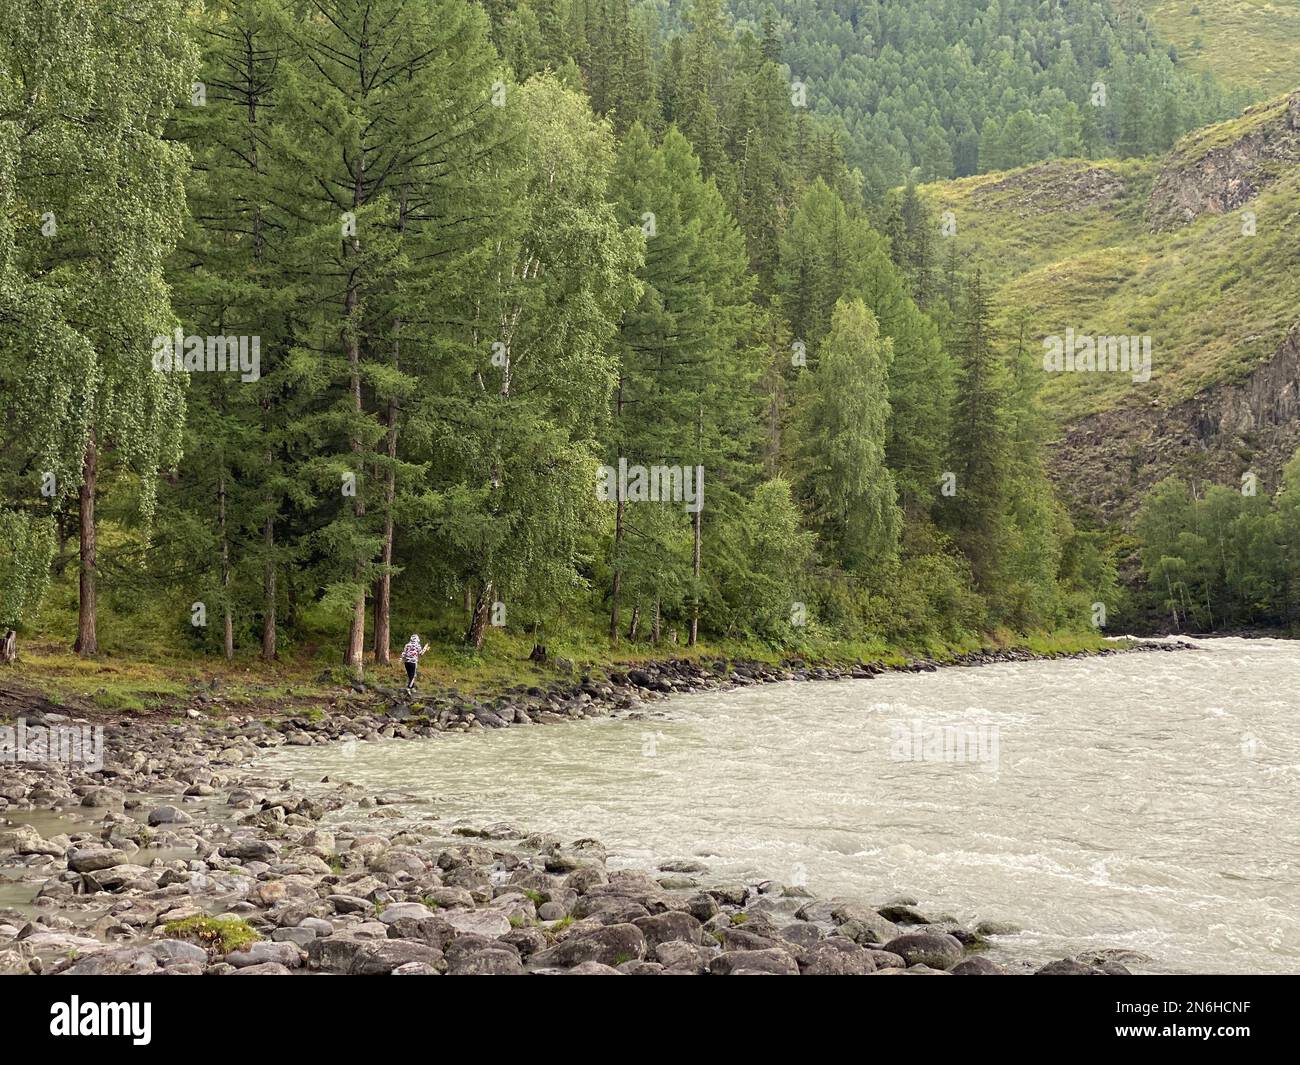 A girl fisherman walks with a fishing rod along the shore near a fast mountain river during the day. Stock Photo